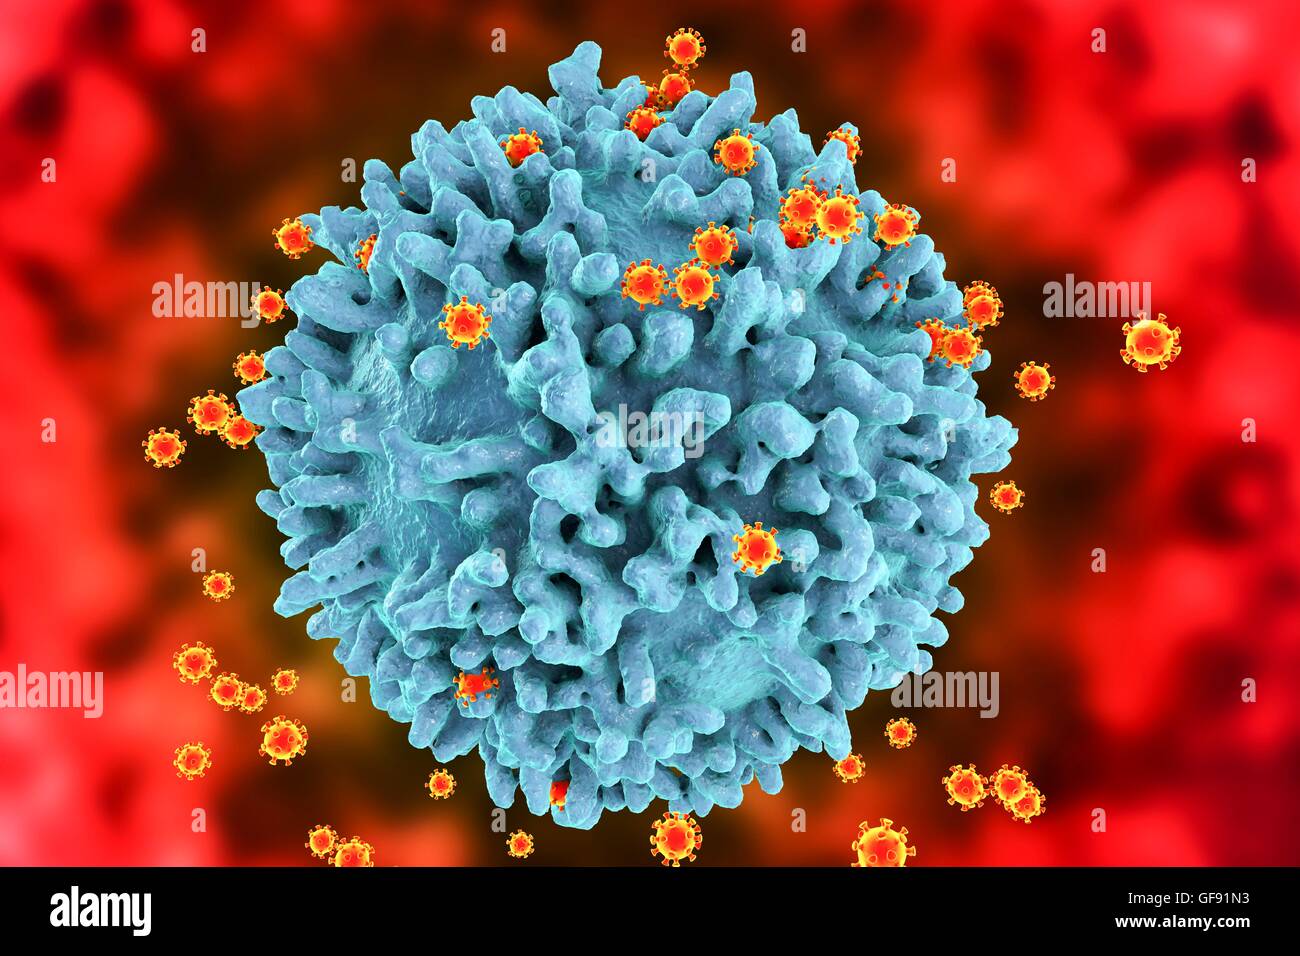 HIV viruses infecting T-lymphocytes, computer illustration. The surface of the T-cell has a lumpy appearance with large irregular surface protrusions. Smaller spherical structures on the cell surface are HIV virus particles budding away from the cell memb Stock Photo